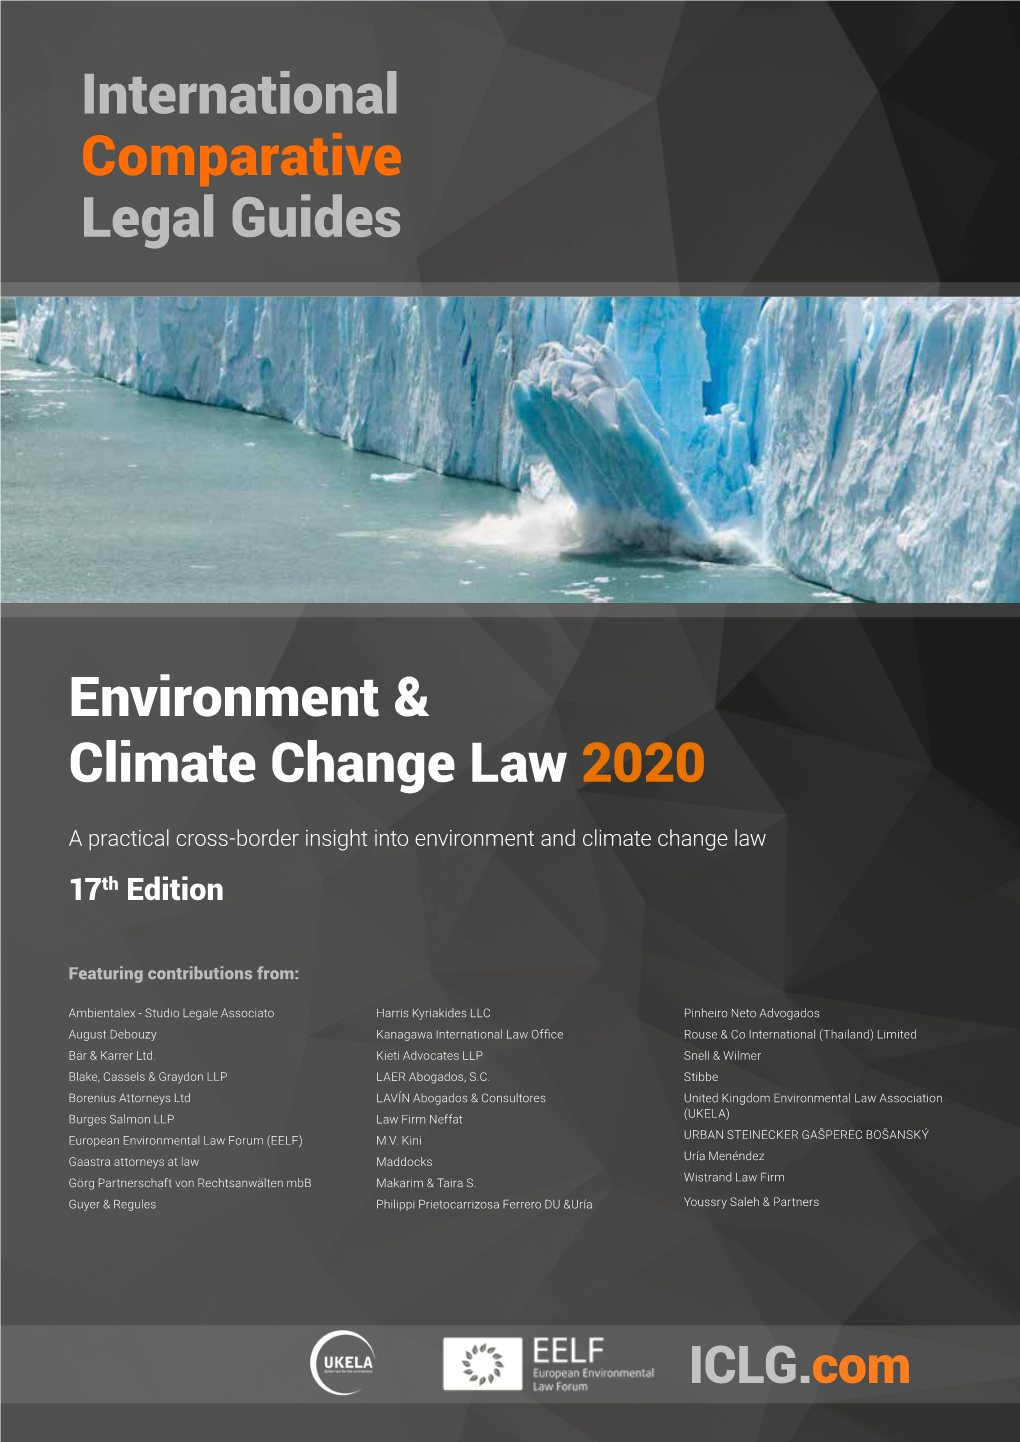 Environment & Climate Change Law 2020